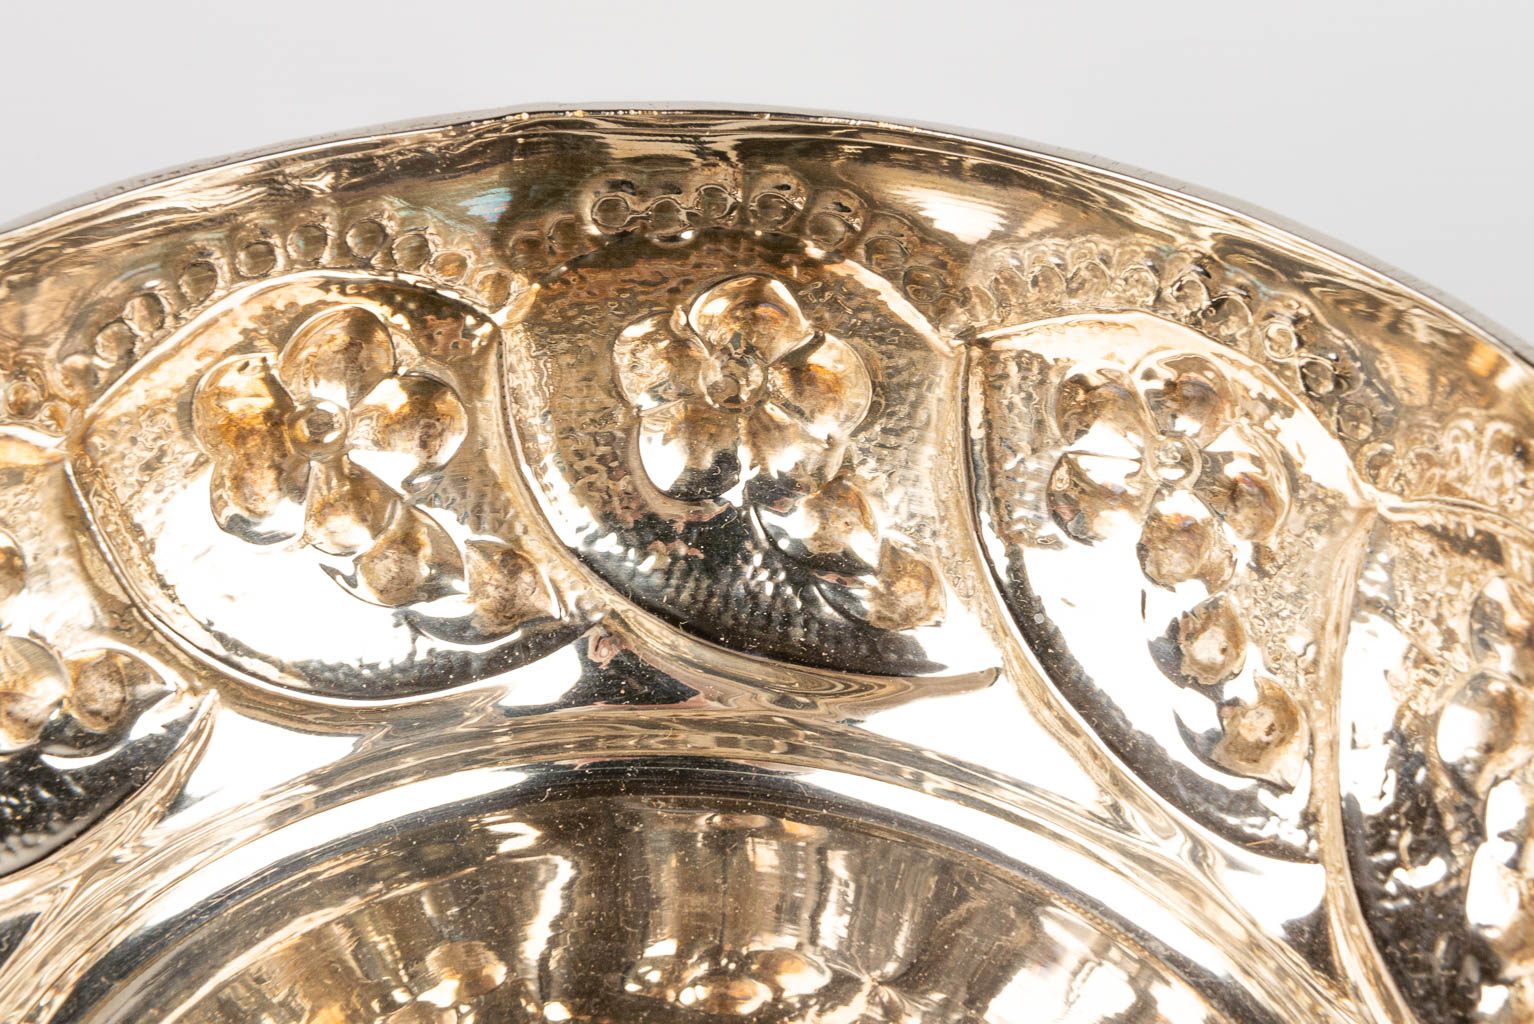 A silver-plated bowl decorated with repousse flowerdecor. 